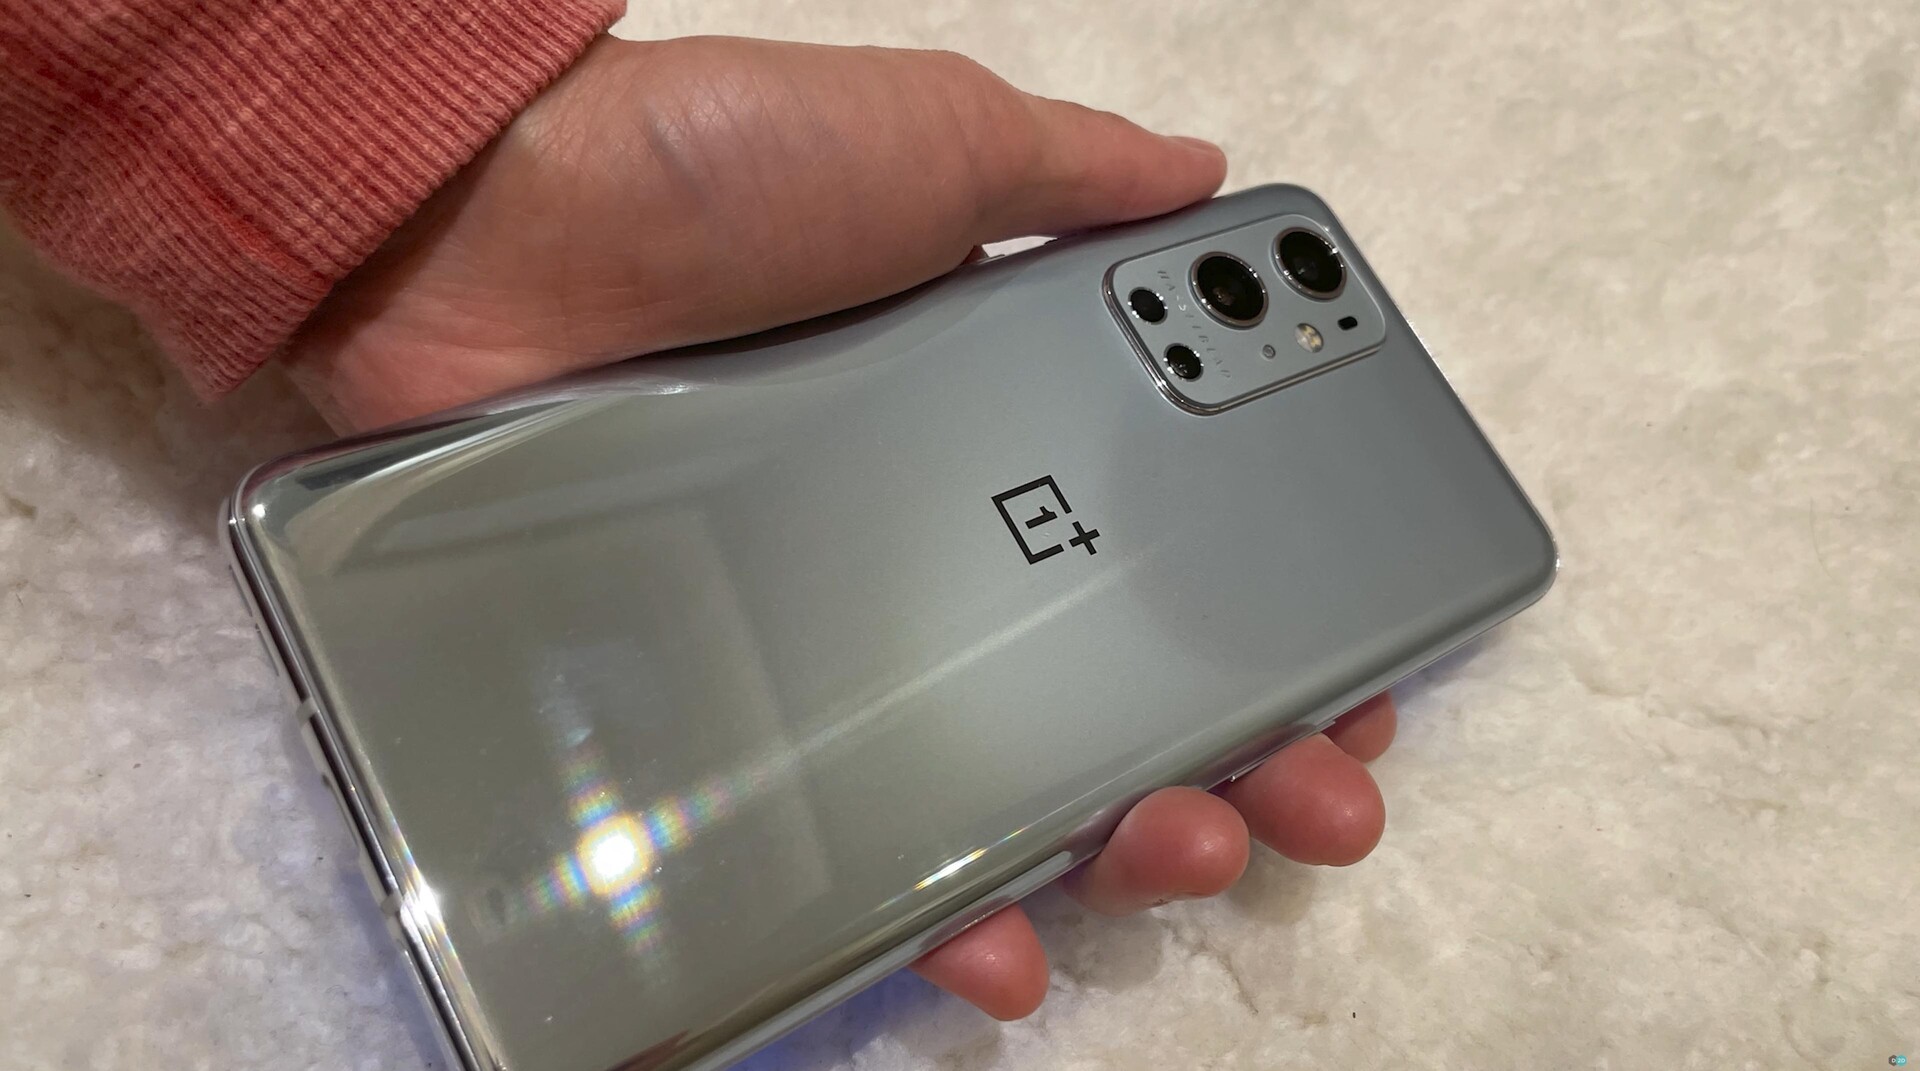 OnePlus 9 Pro is leaking again with 4K and 120 FPS video recording capabilities and improved camera hardware;  The OnePlus 9 series launches teasers to start very soon